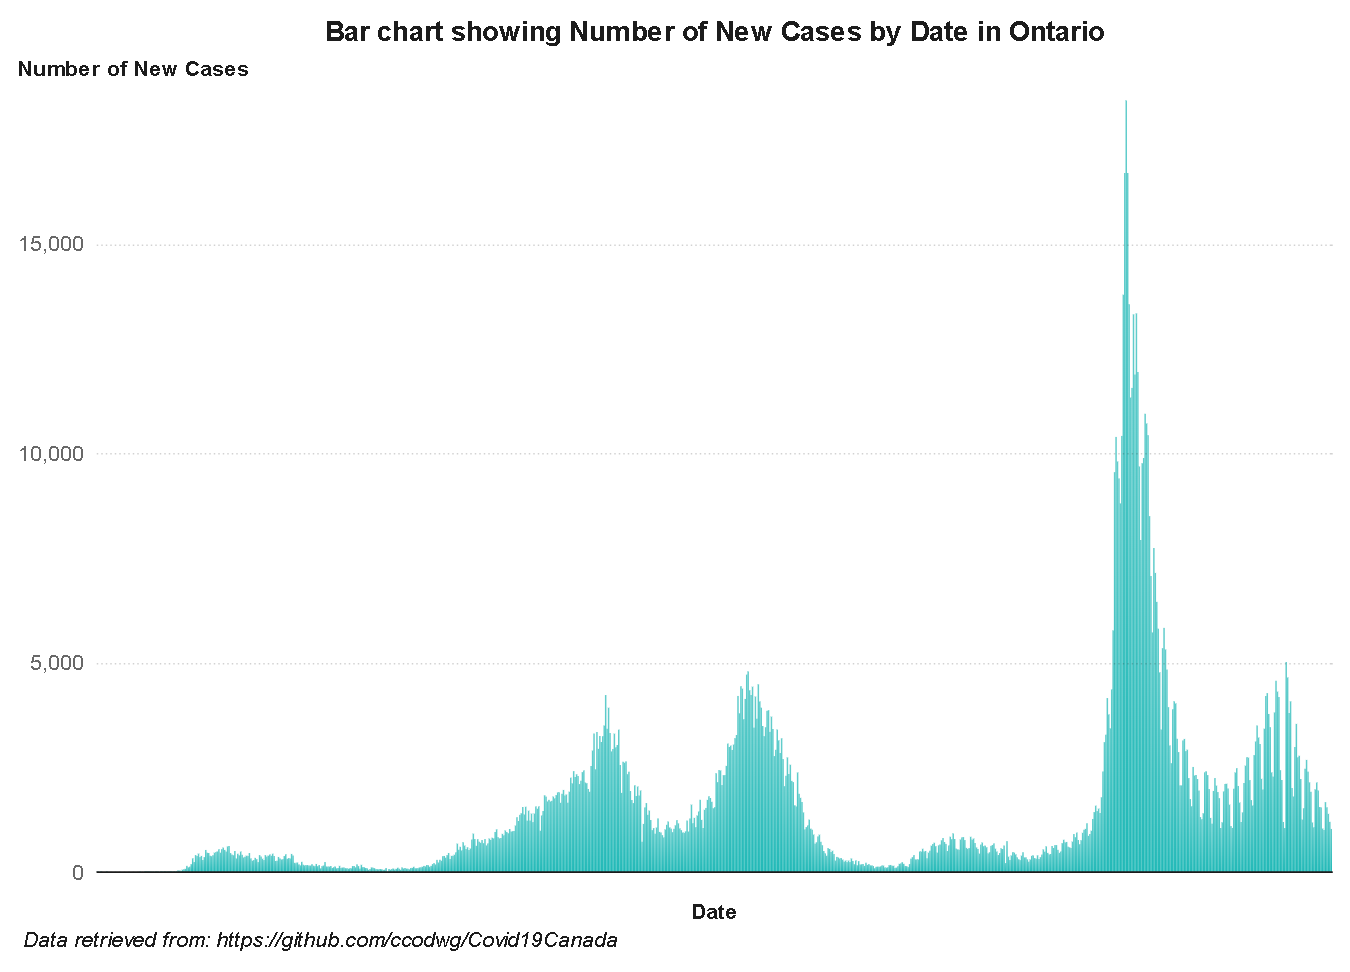 A bar graph with vertical bars depicting the number of new COVID-19 cases in Ontario.